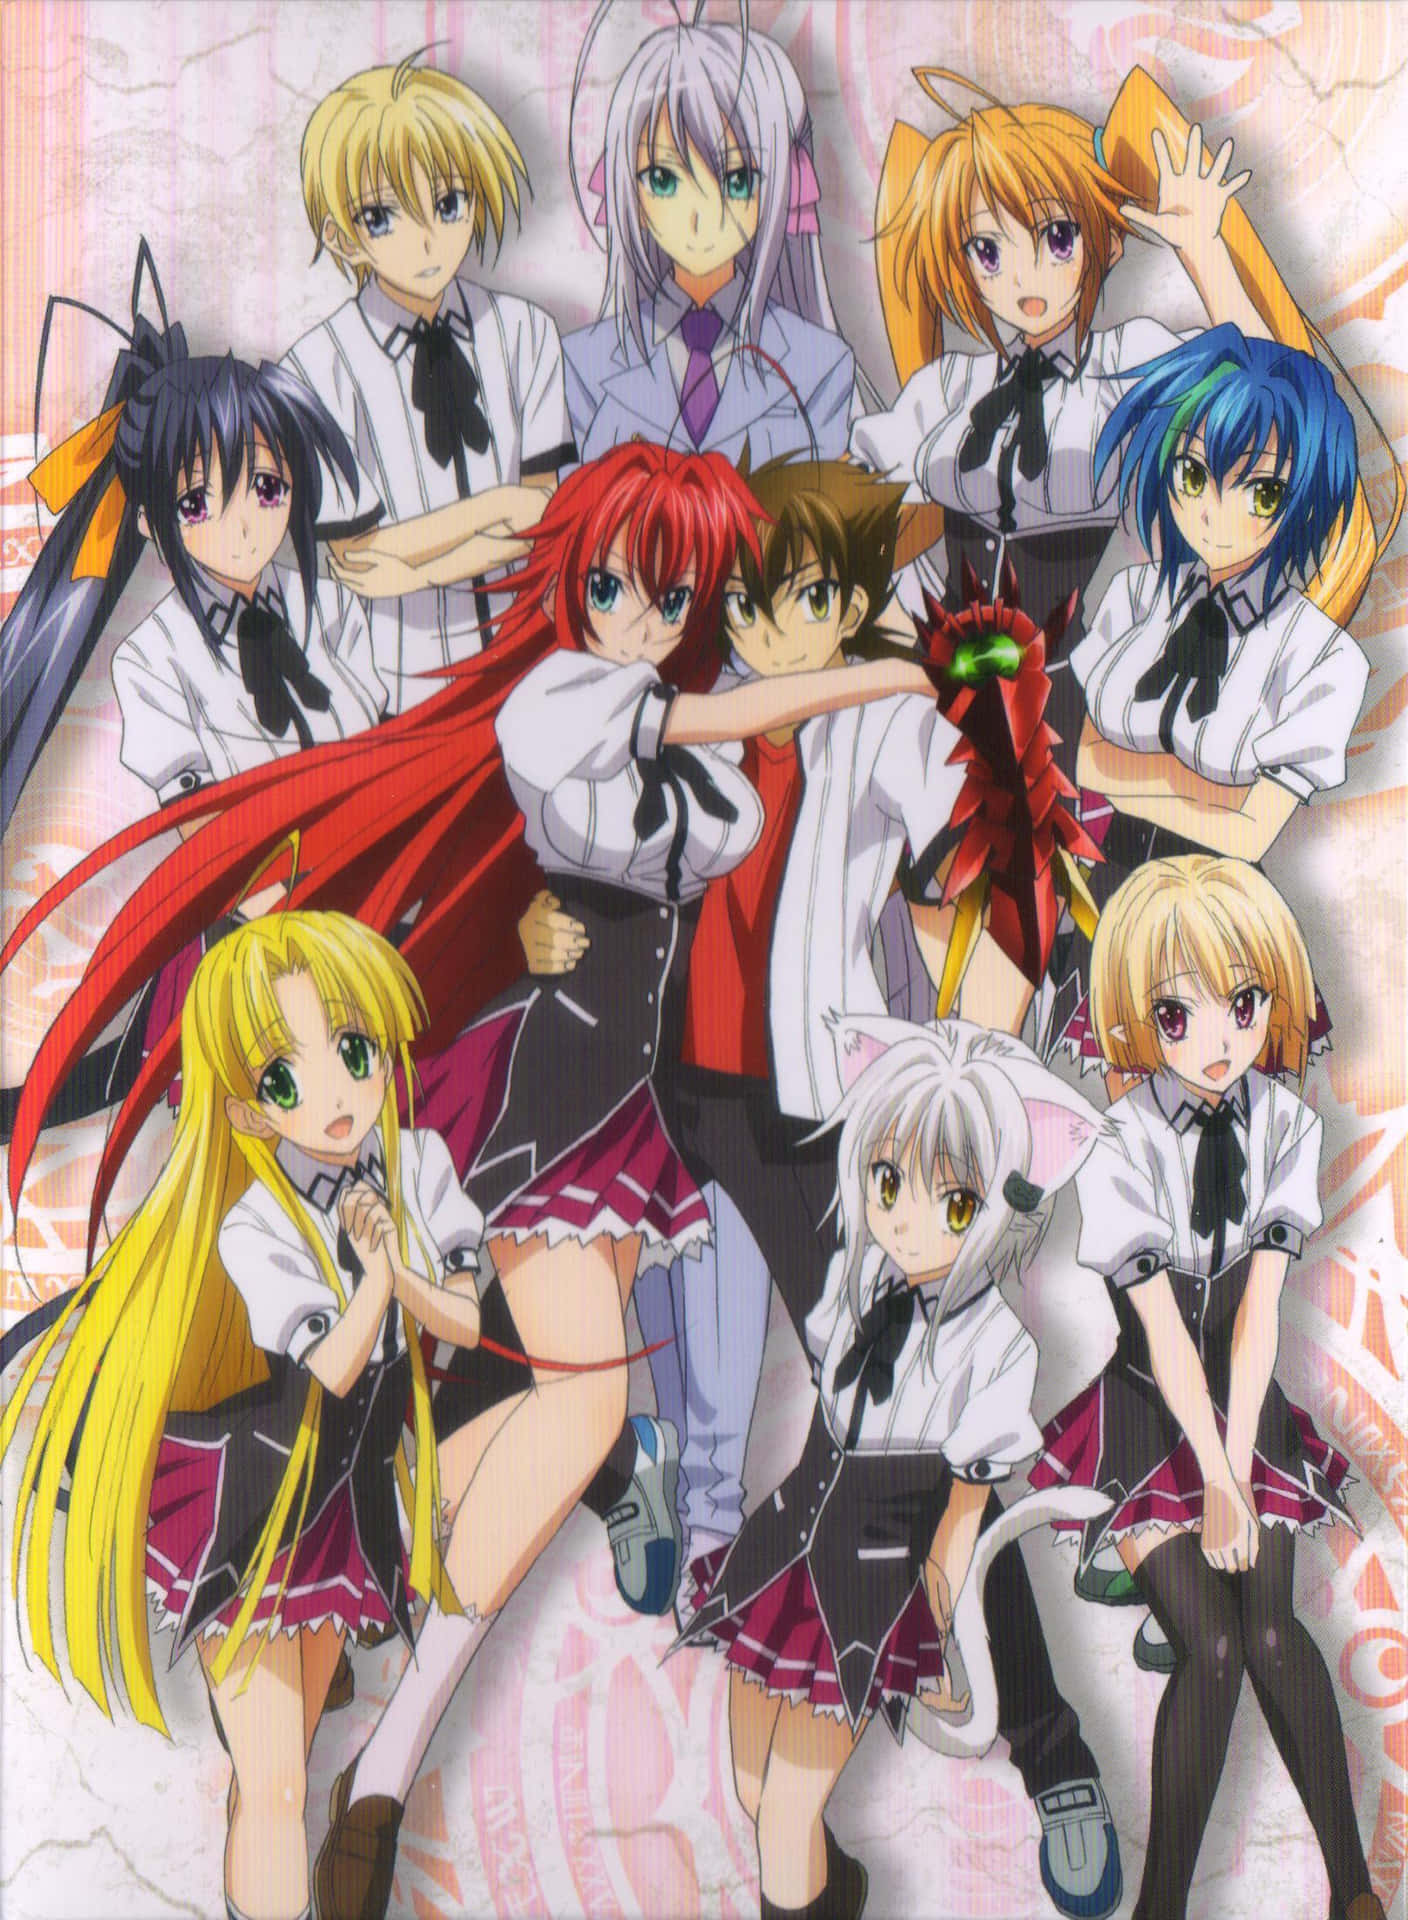 Get lost in the adventure of Highschool Dxd